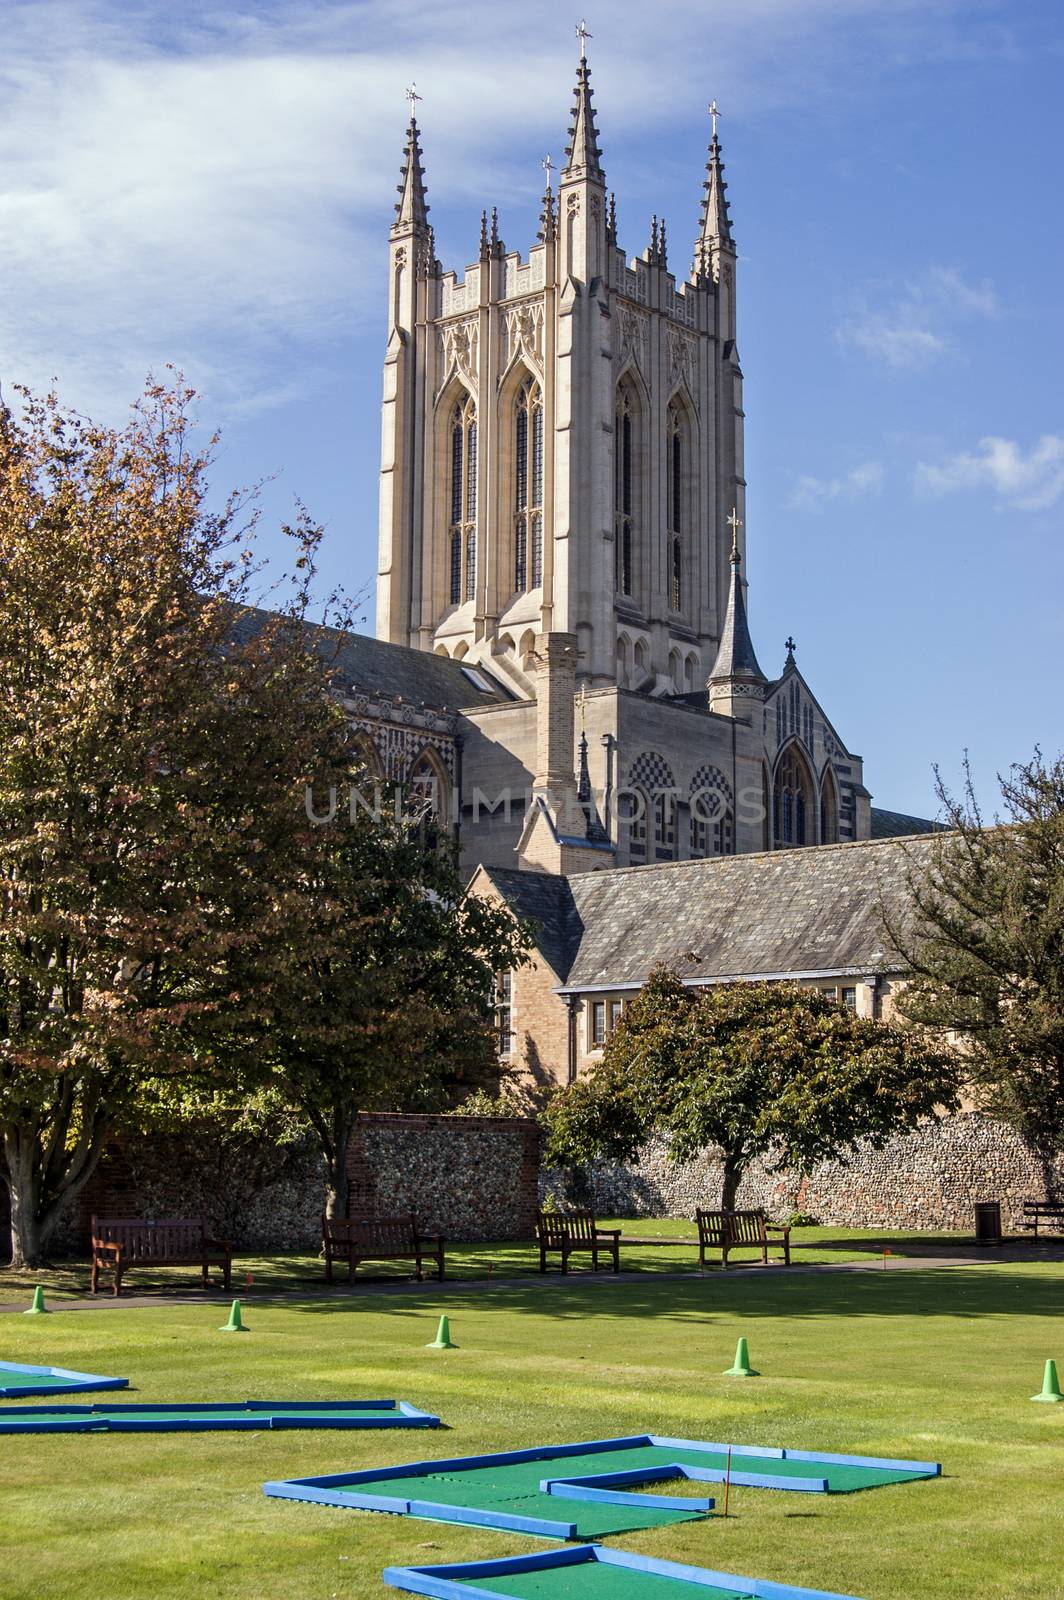 View of the Cathedral of Bury St Edmunds from Abbey Gardens, with crazy golf course in the foreground. Suffolk.